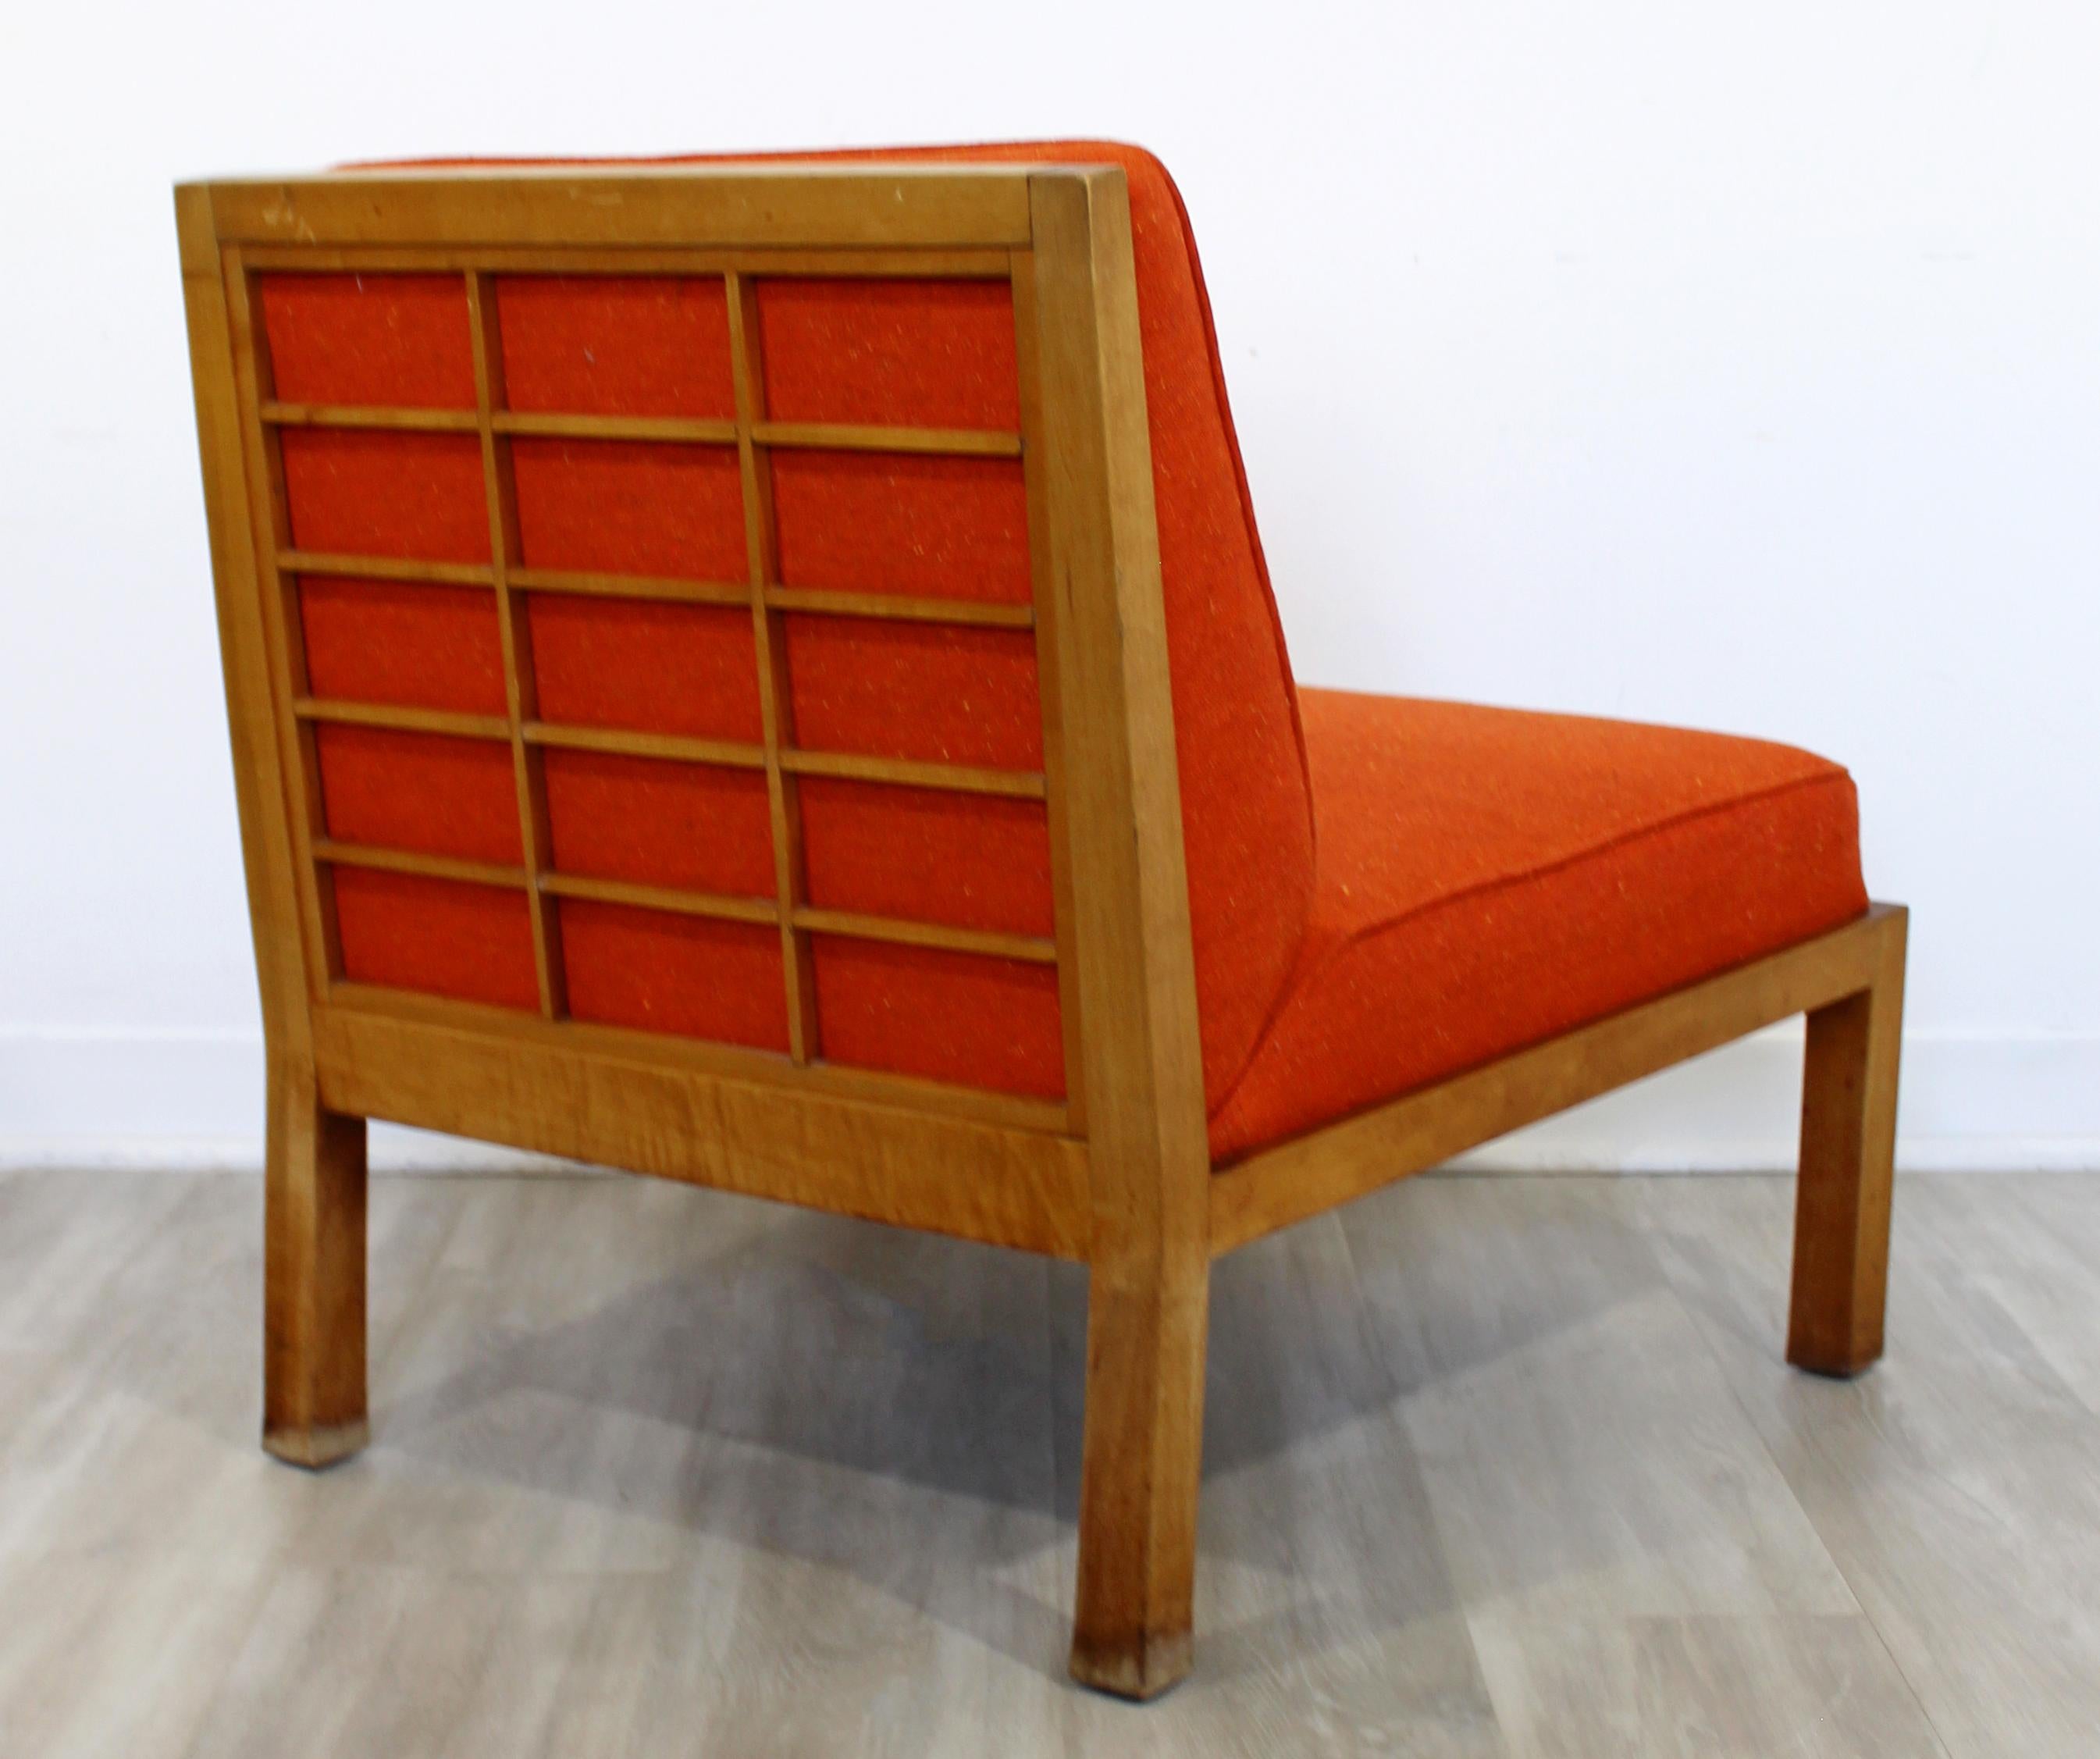 For your consideration is an incredible, newly reupholstered side lounge chair, by Baker Furniture, circa 1960s. In excellent vintage condition. The dimensions are 28